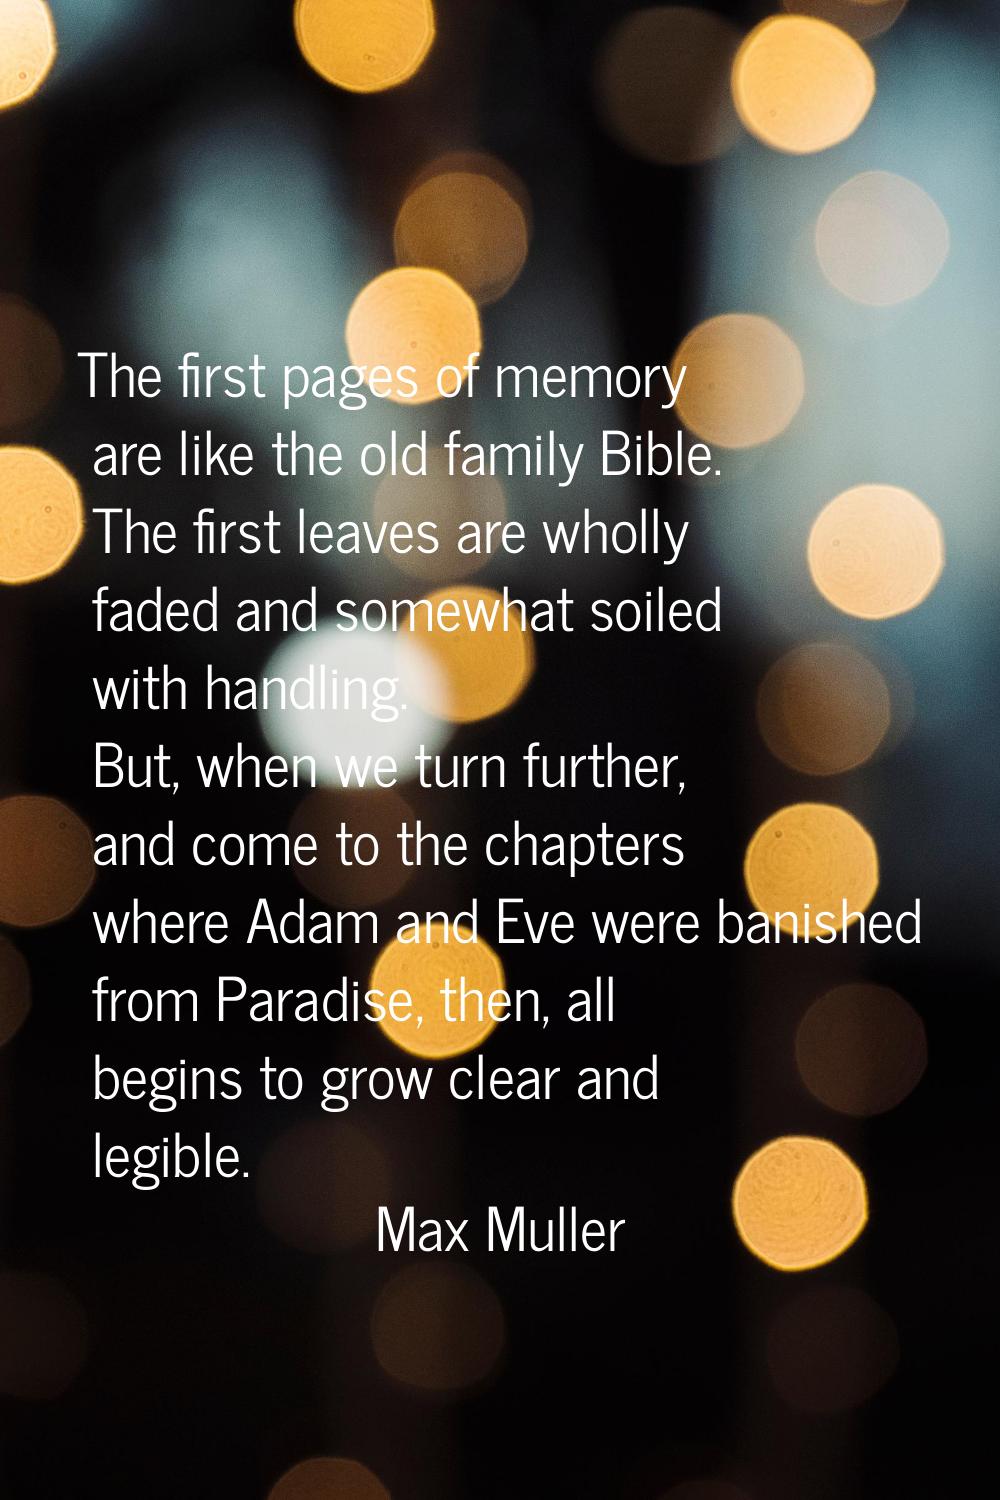 The first pages of memory are like the old family Bible. The first leaves are wholly faded and some